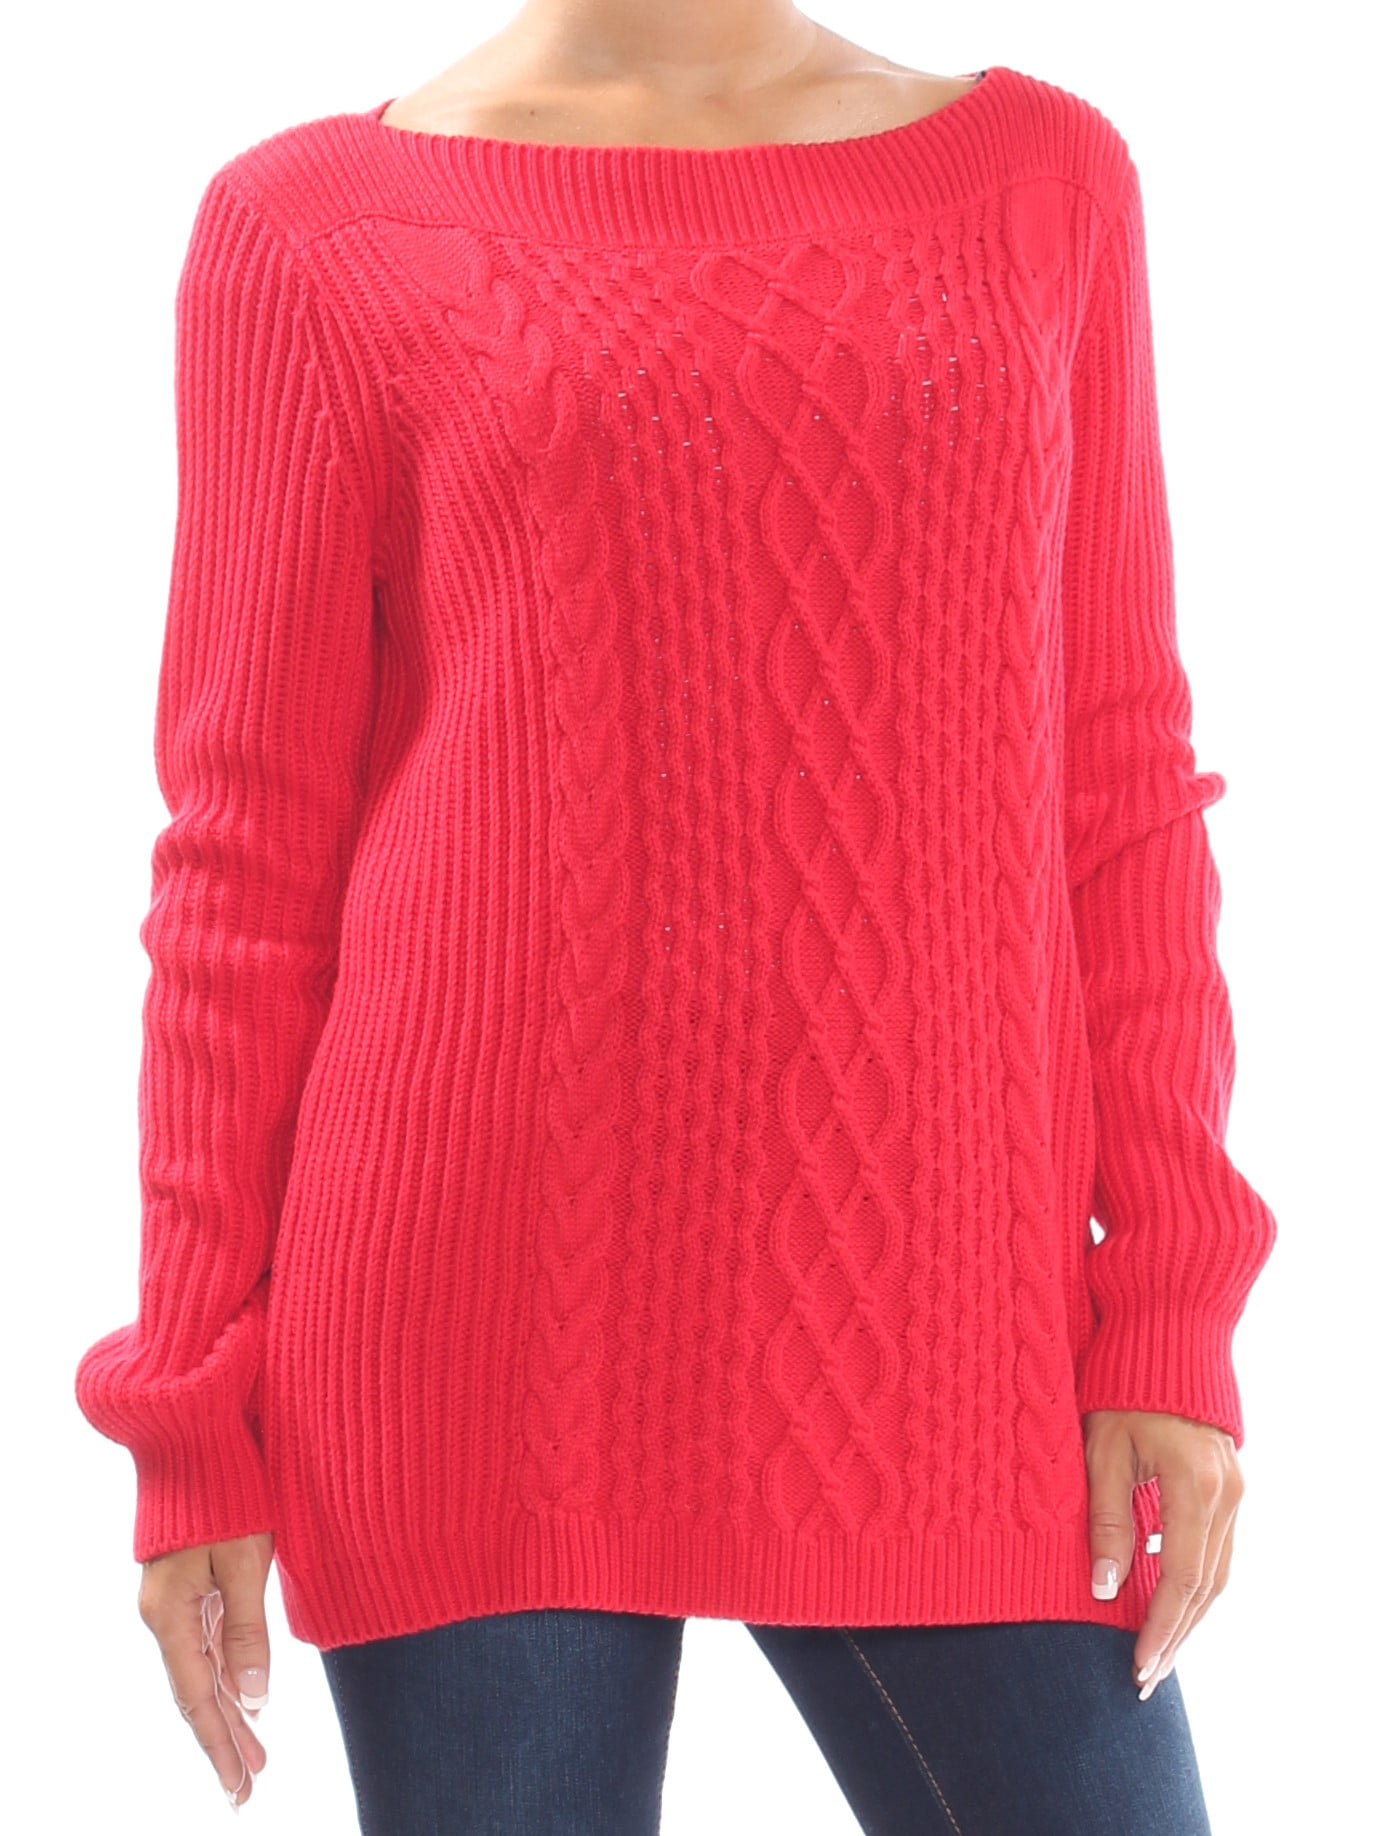 TOMMY HILFIGER Womens Red Cable-knit Long Sleeve Boat Neck Sweater Size: S -